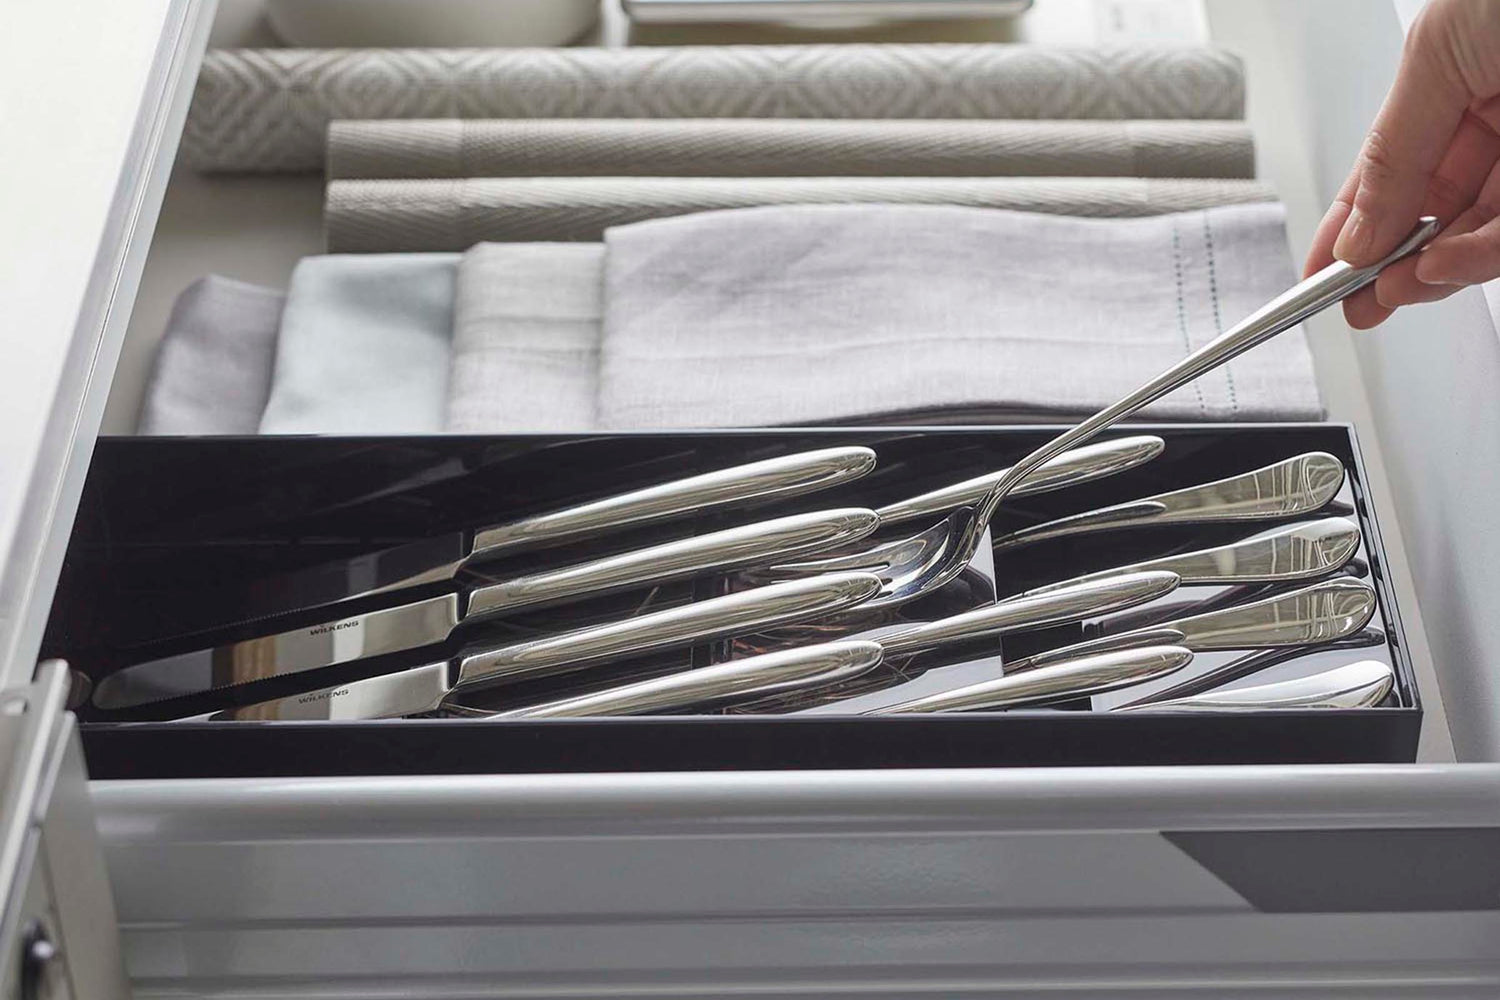 View 10 - Close up side view of black Cutlery Storage Organizer holding silverware by Yamazaki Home.